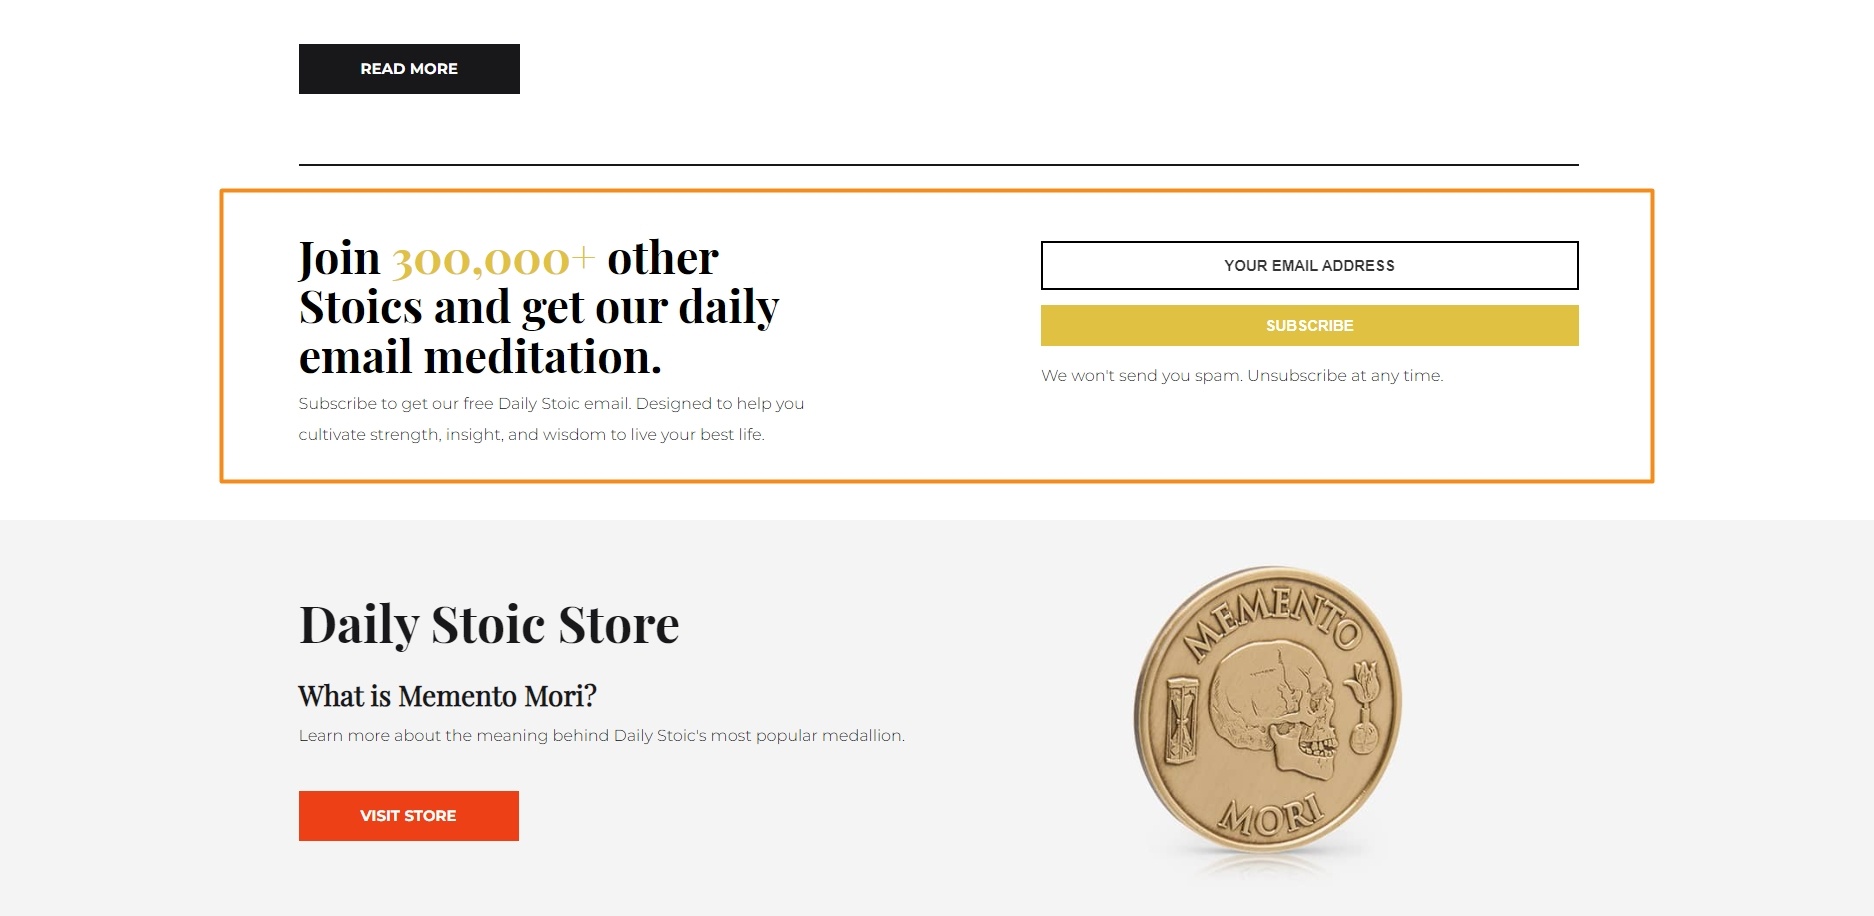 The Daily Stoic offers a daily email meditation in their email sign up box